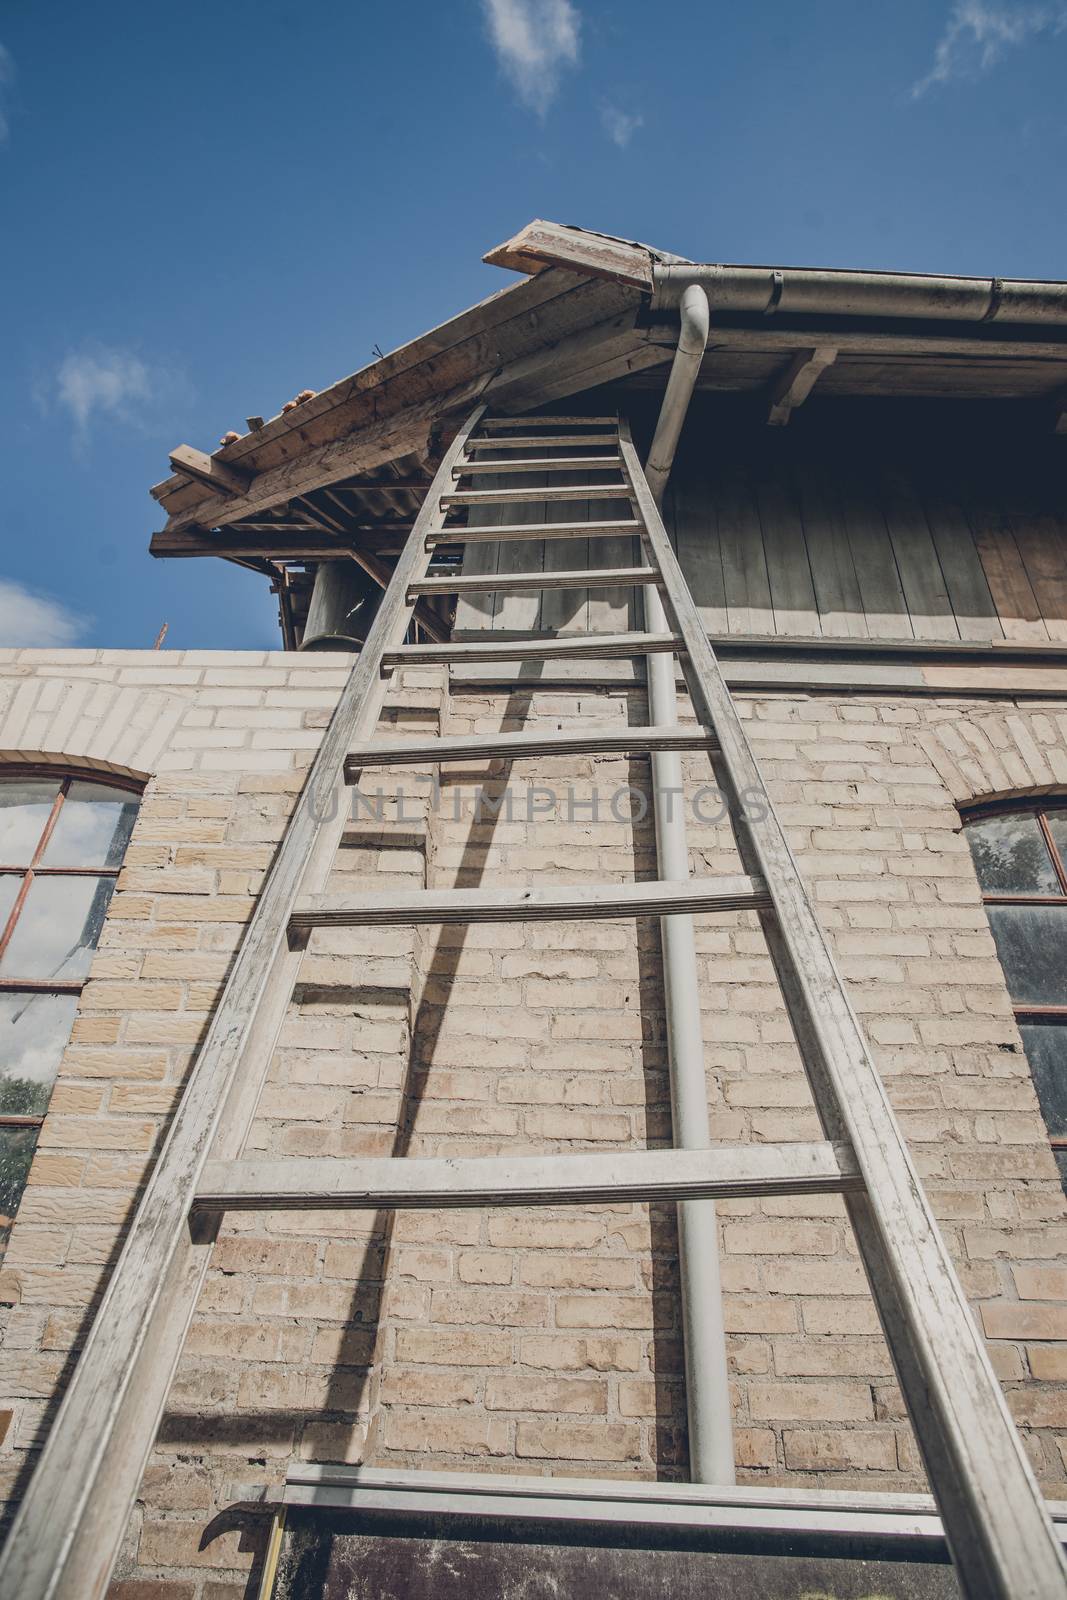 Tall ladder at an old building with damaged roof